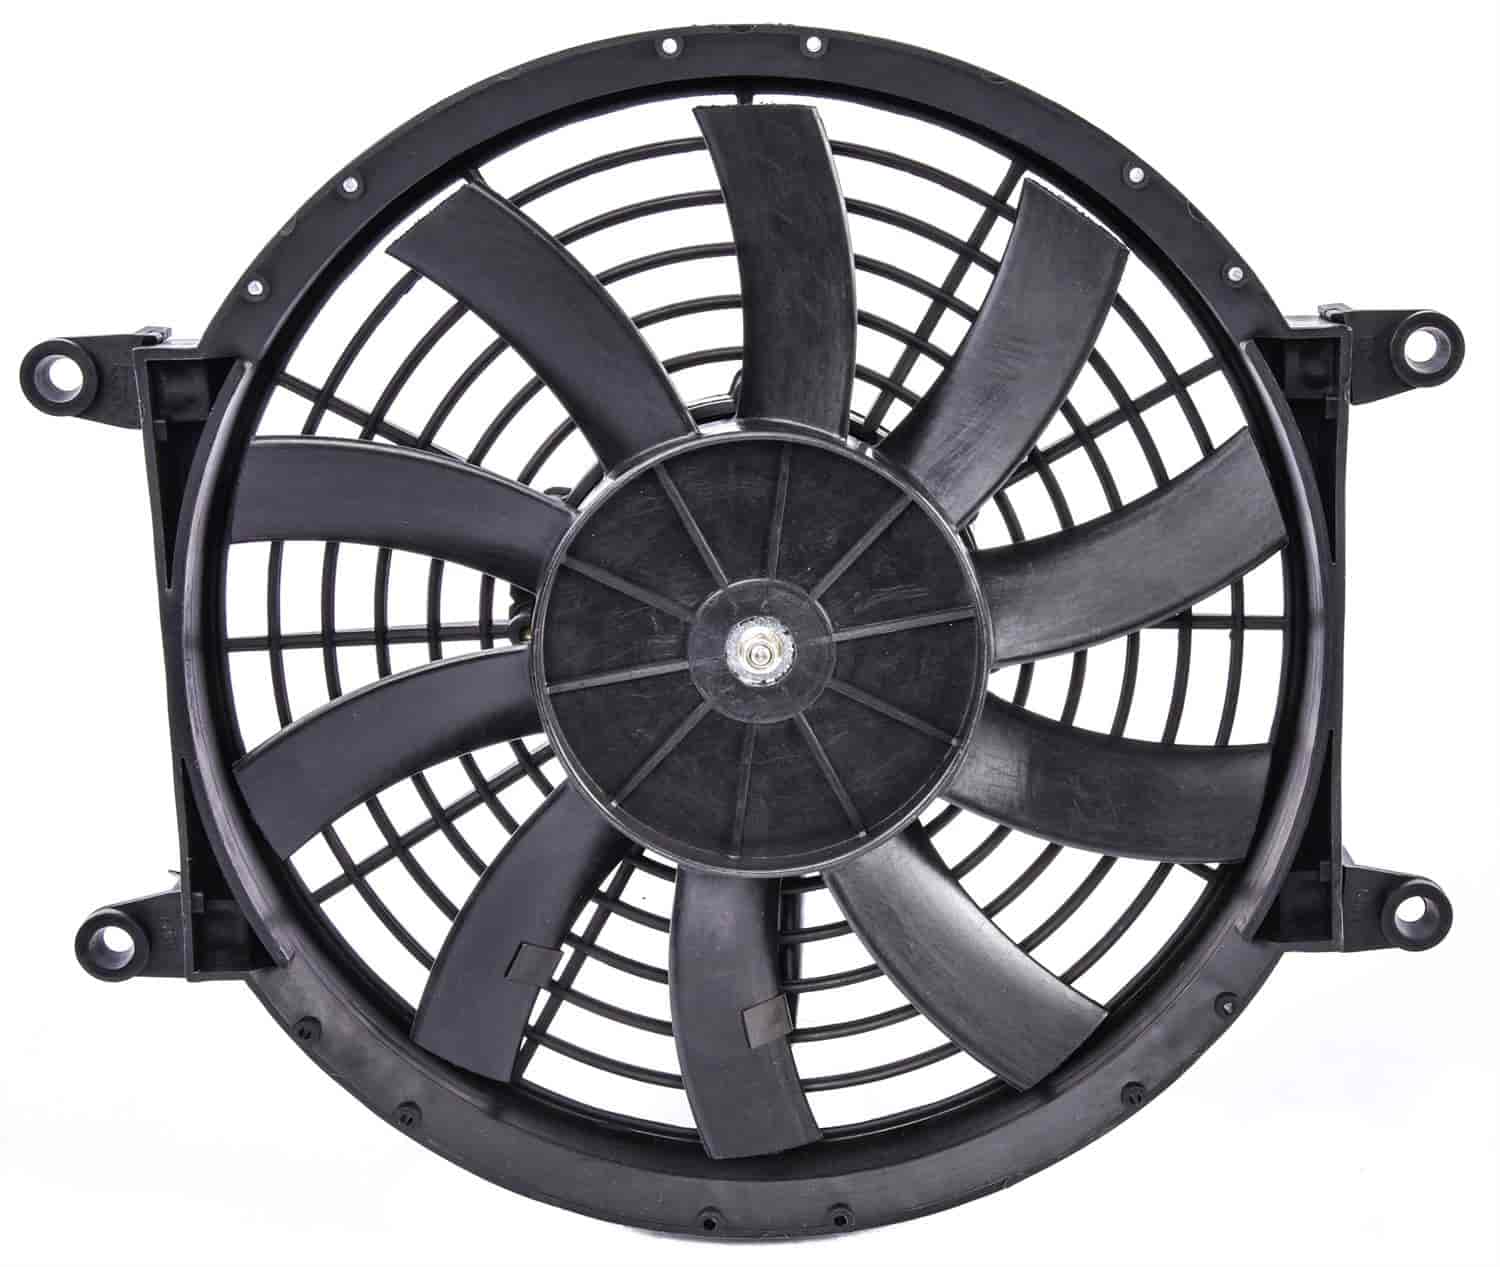 SET Black Fan 14" inch Universal Slim Fan Electric Radiator Engine Cooling Fans Push Pull 12V With Mount Brackets And Tie Straps Kit - 2